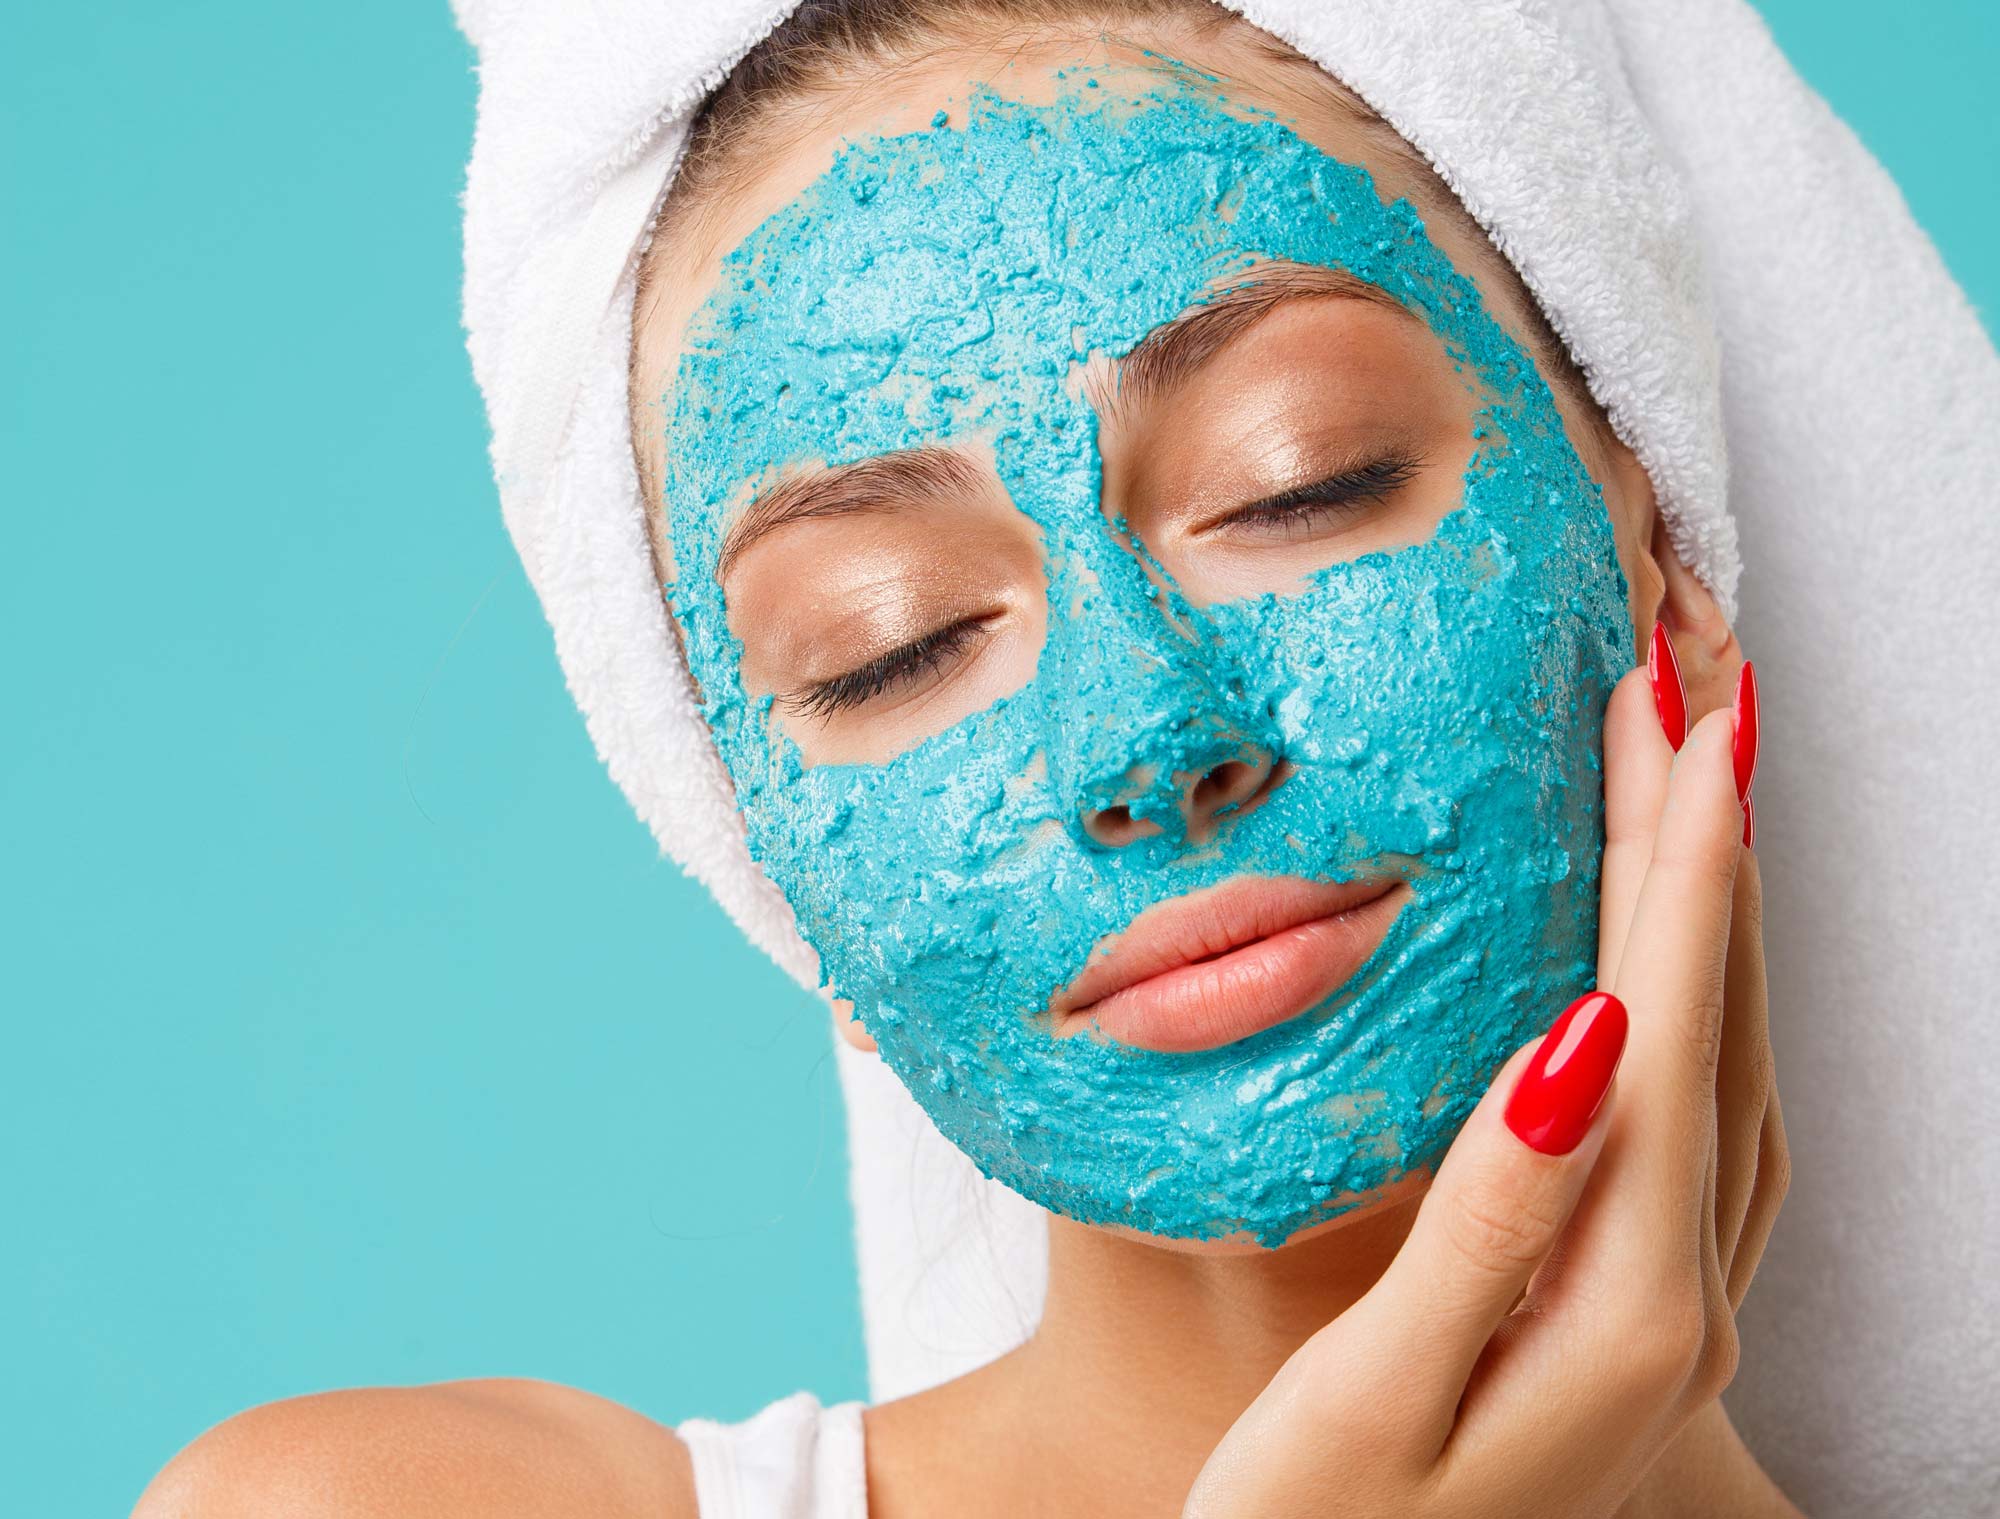 When is it time for a facial peel?